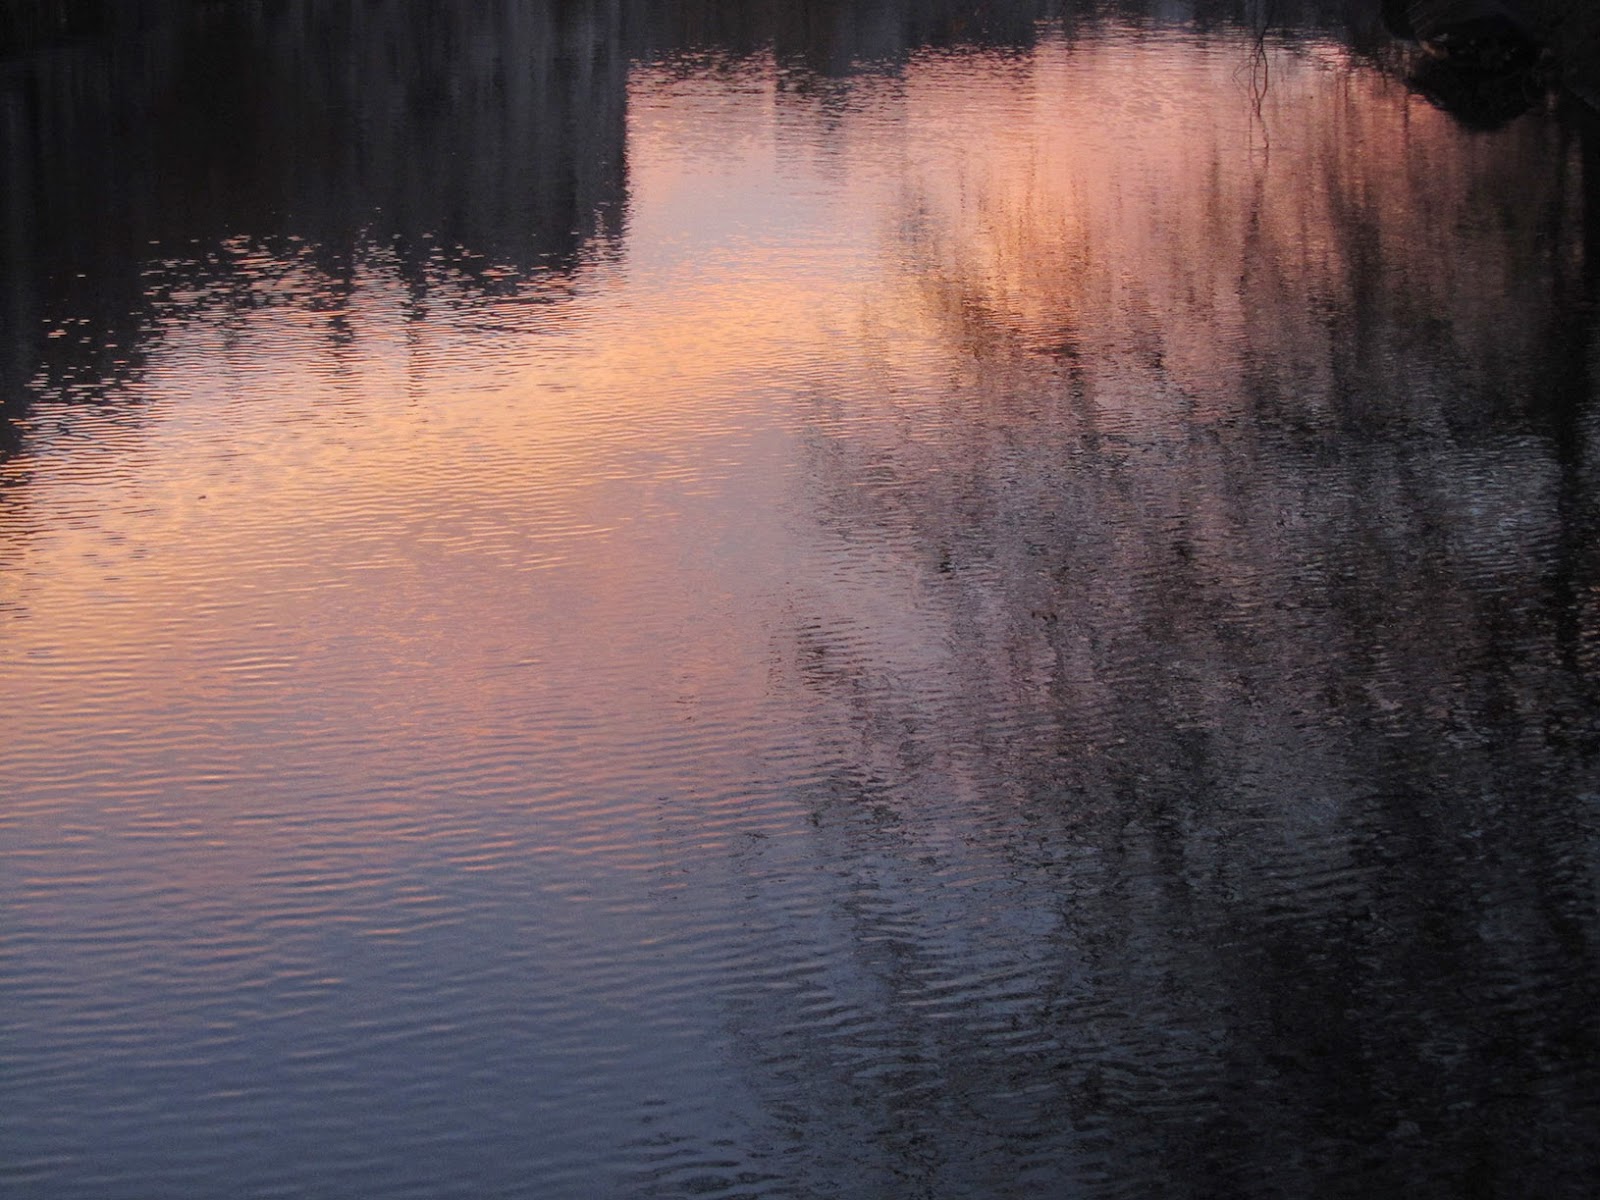 reflection of a pink sunrise in a canal